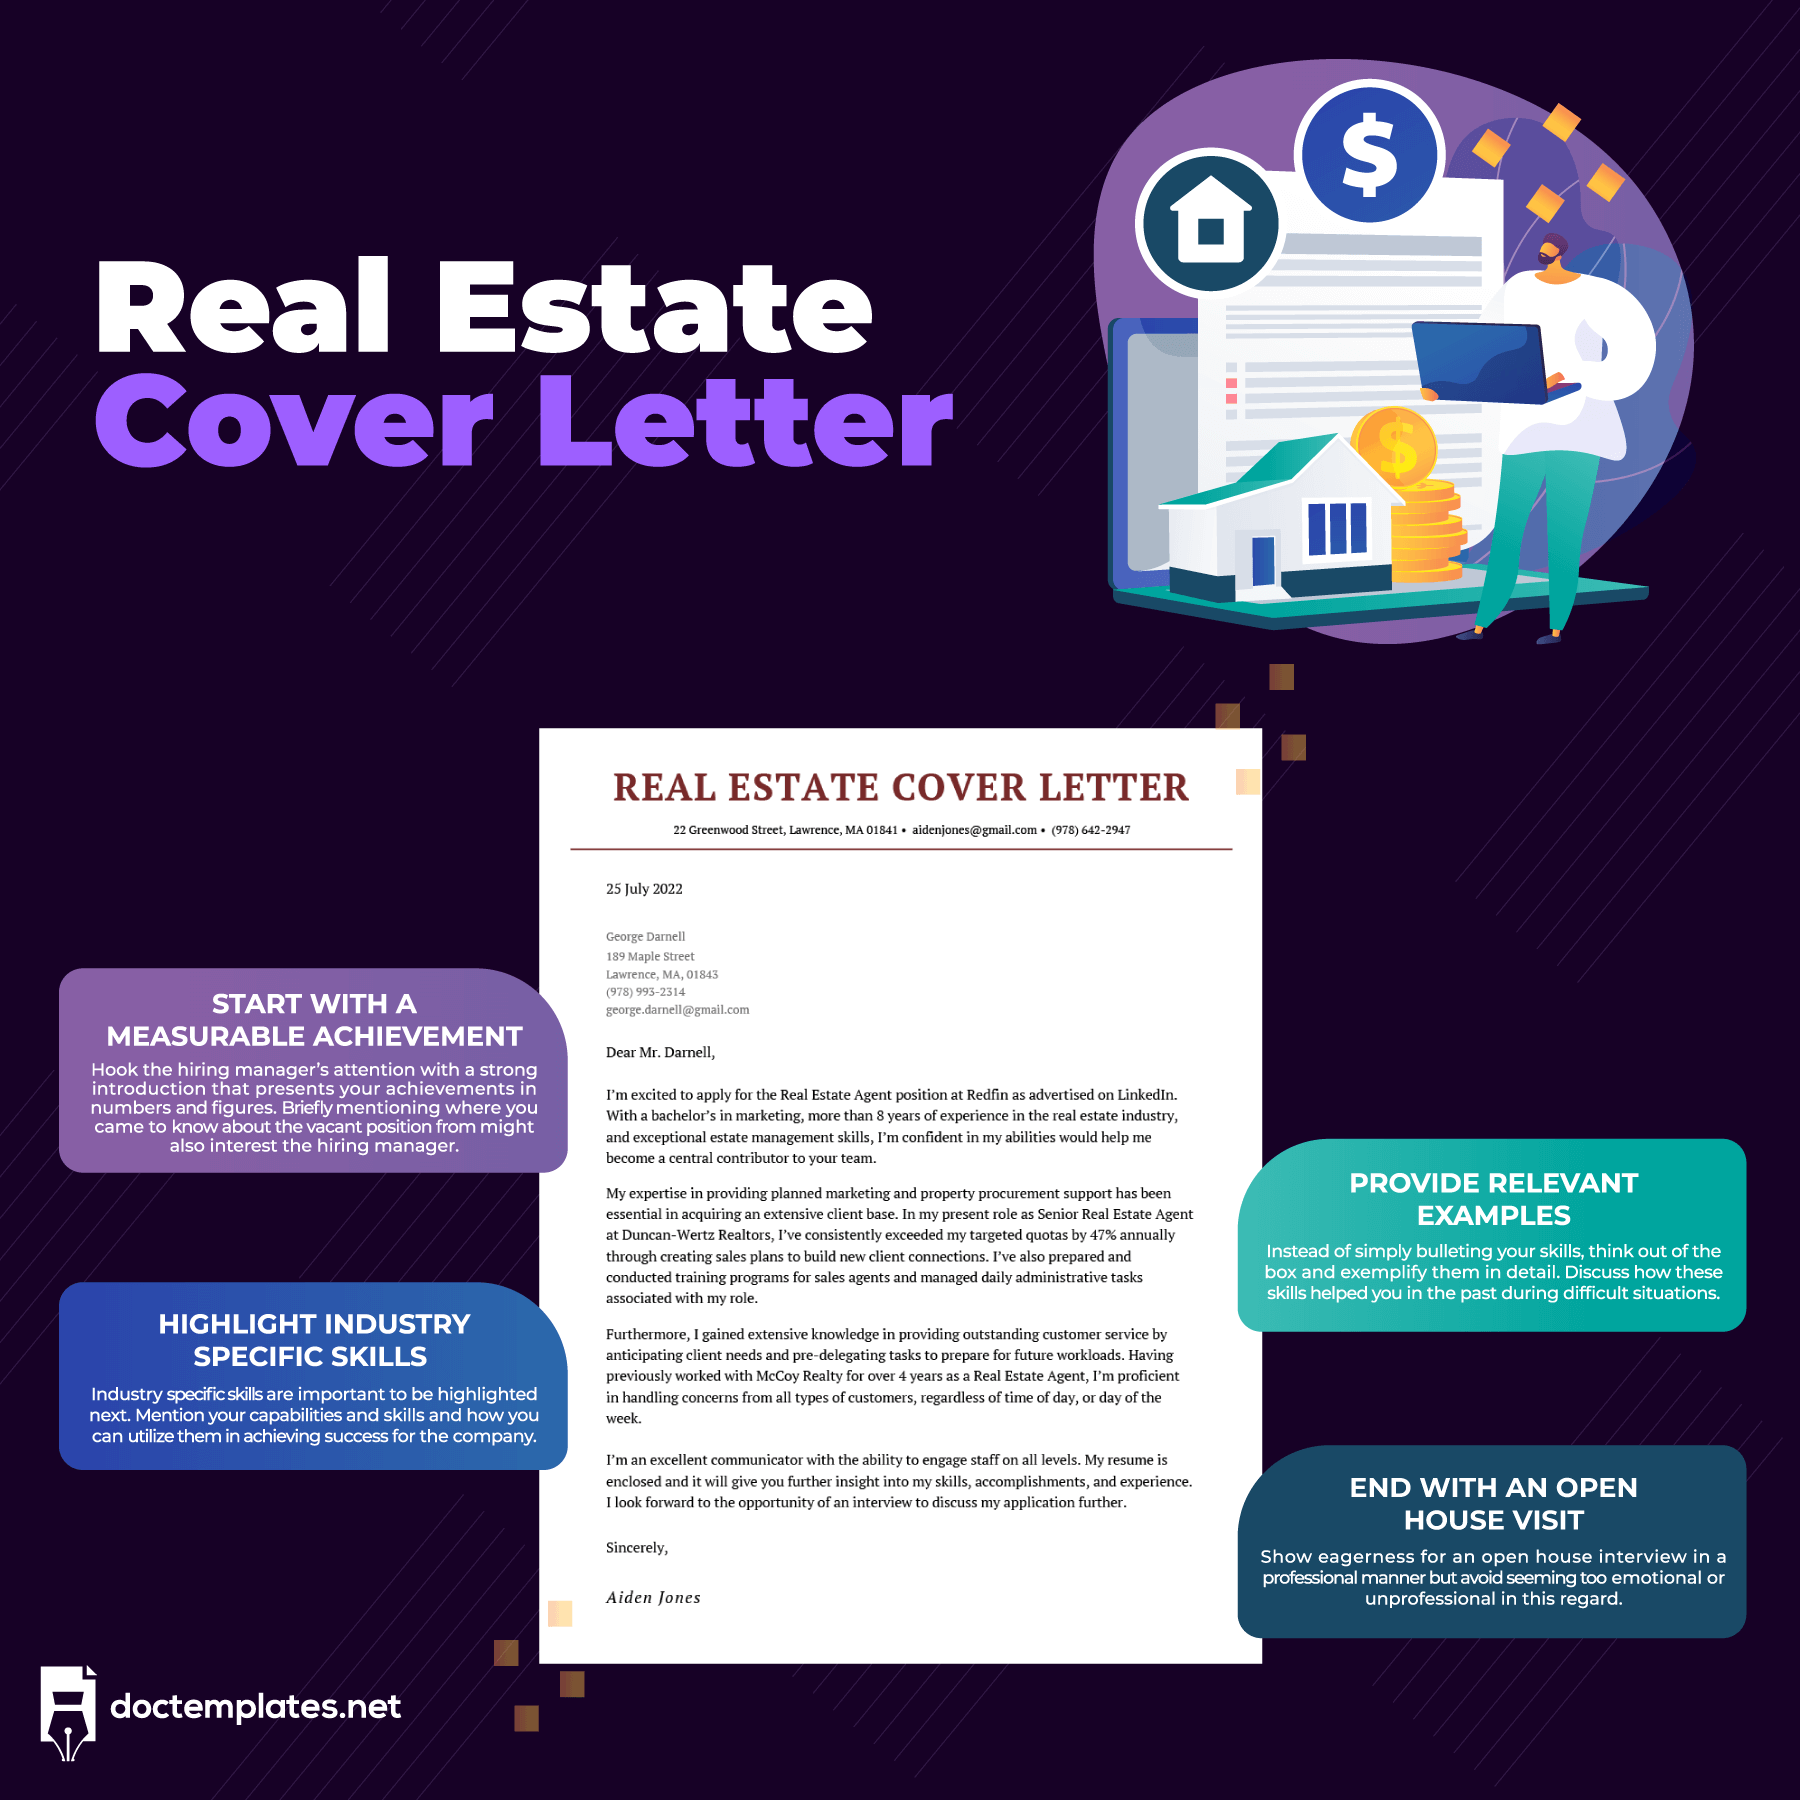 This infographic is about real estate cover letter.